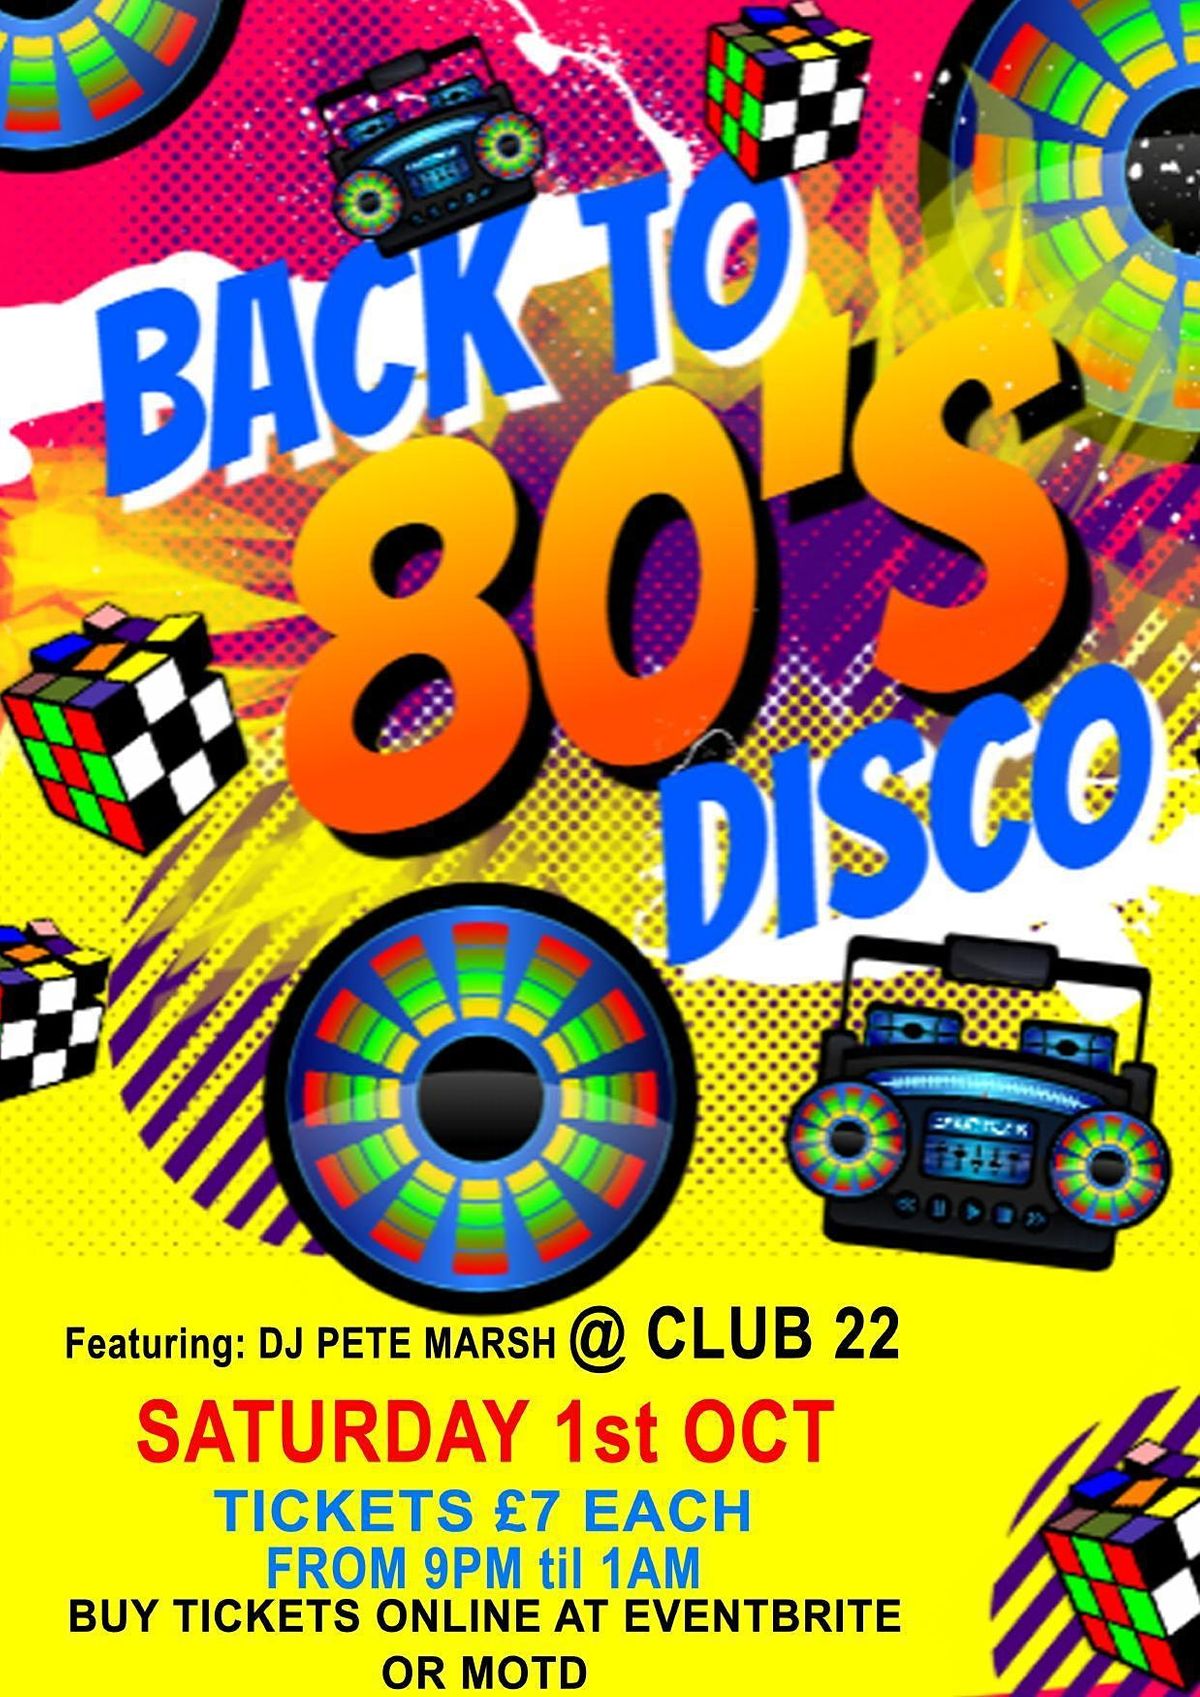 Back To The 80s Disco with DJ PM @ Club 22